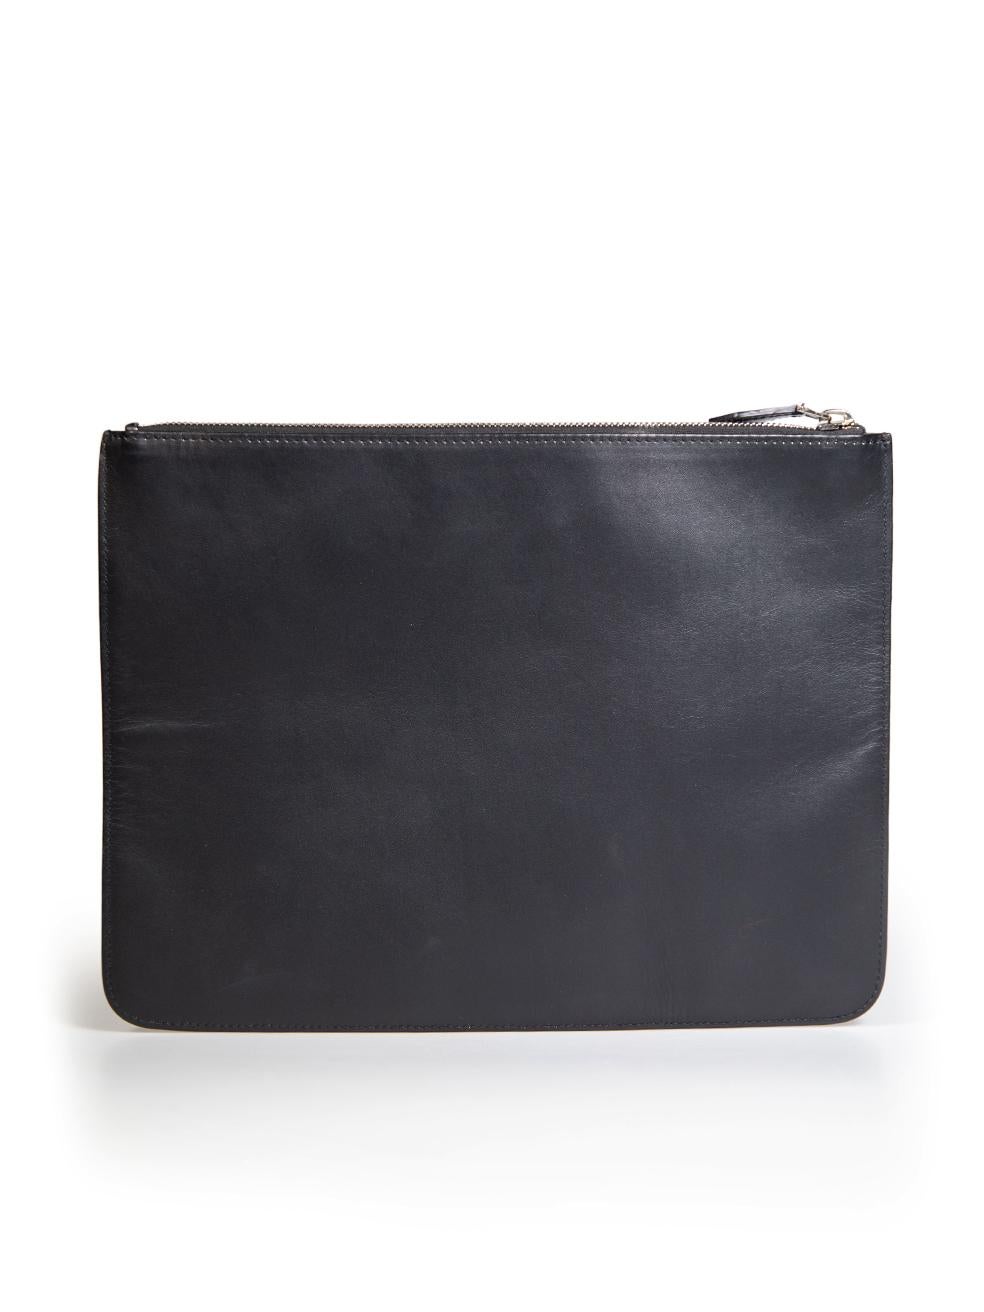 Givenchy Black Leather Graphic Printed Zip Clutch In Excellent Condition For Sale In London, GB